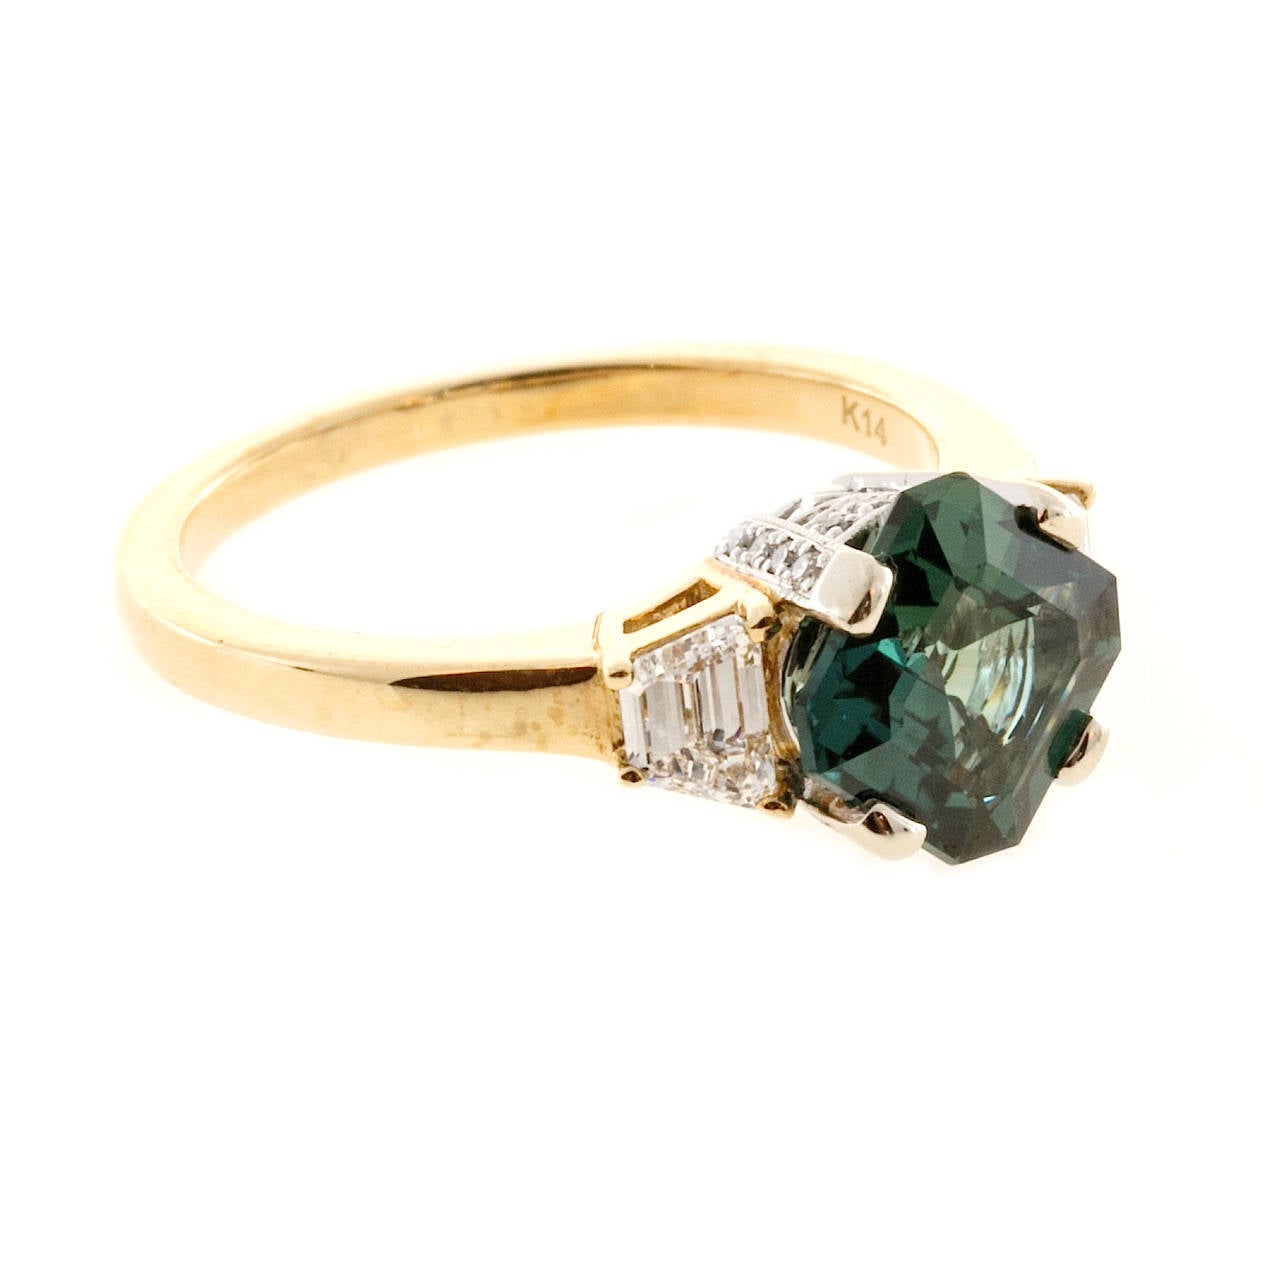 Rare one of a kind MK 1920's Art Deco natural bluish green Sapphire from an estate.

AGL certified 2.33ct natural no heat grayish blue green Sapphire, no enhancements. AGL certificate # GB50723
22 round full cut diamonds, approx. total weight